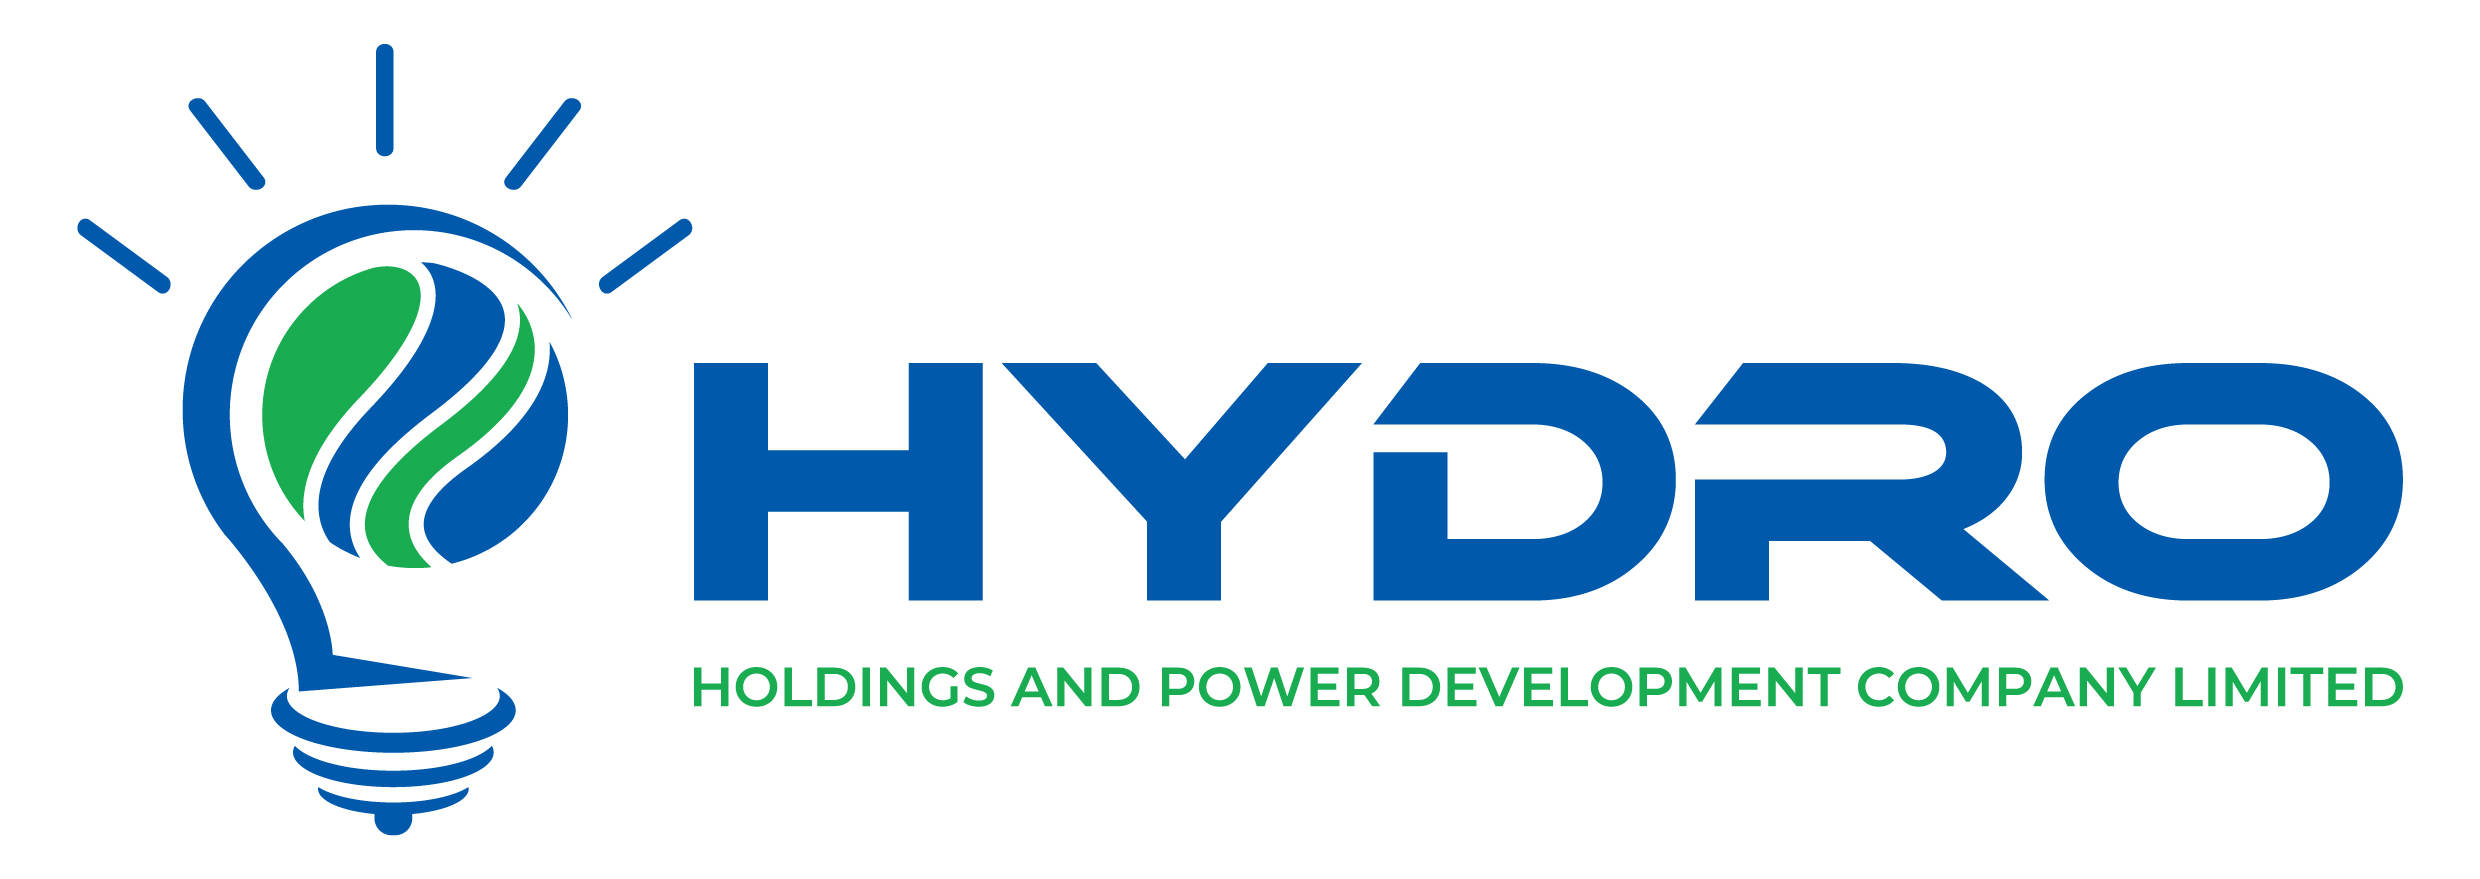 Hydro HOLDINGS AND POWER DEVELOPMENT COMPANY LIMITED-01